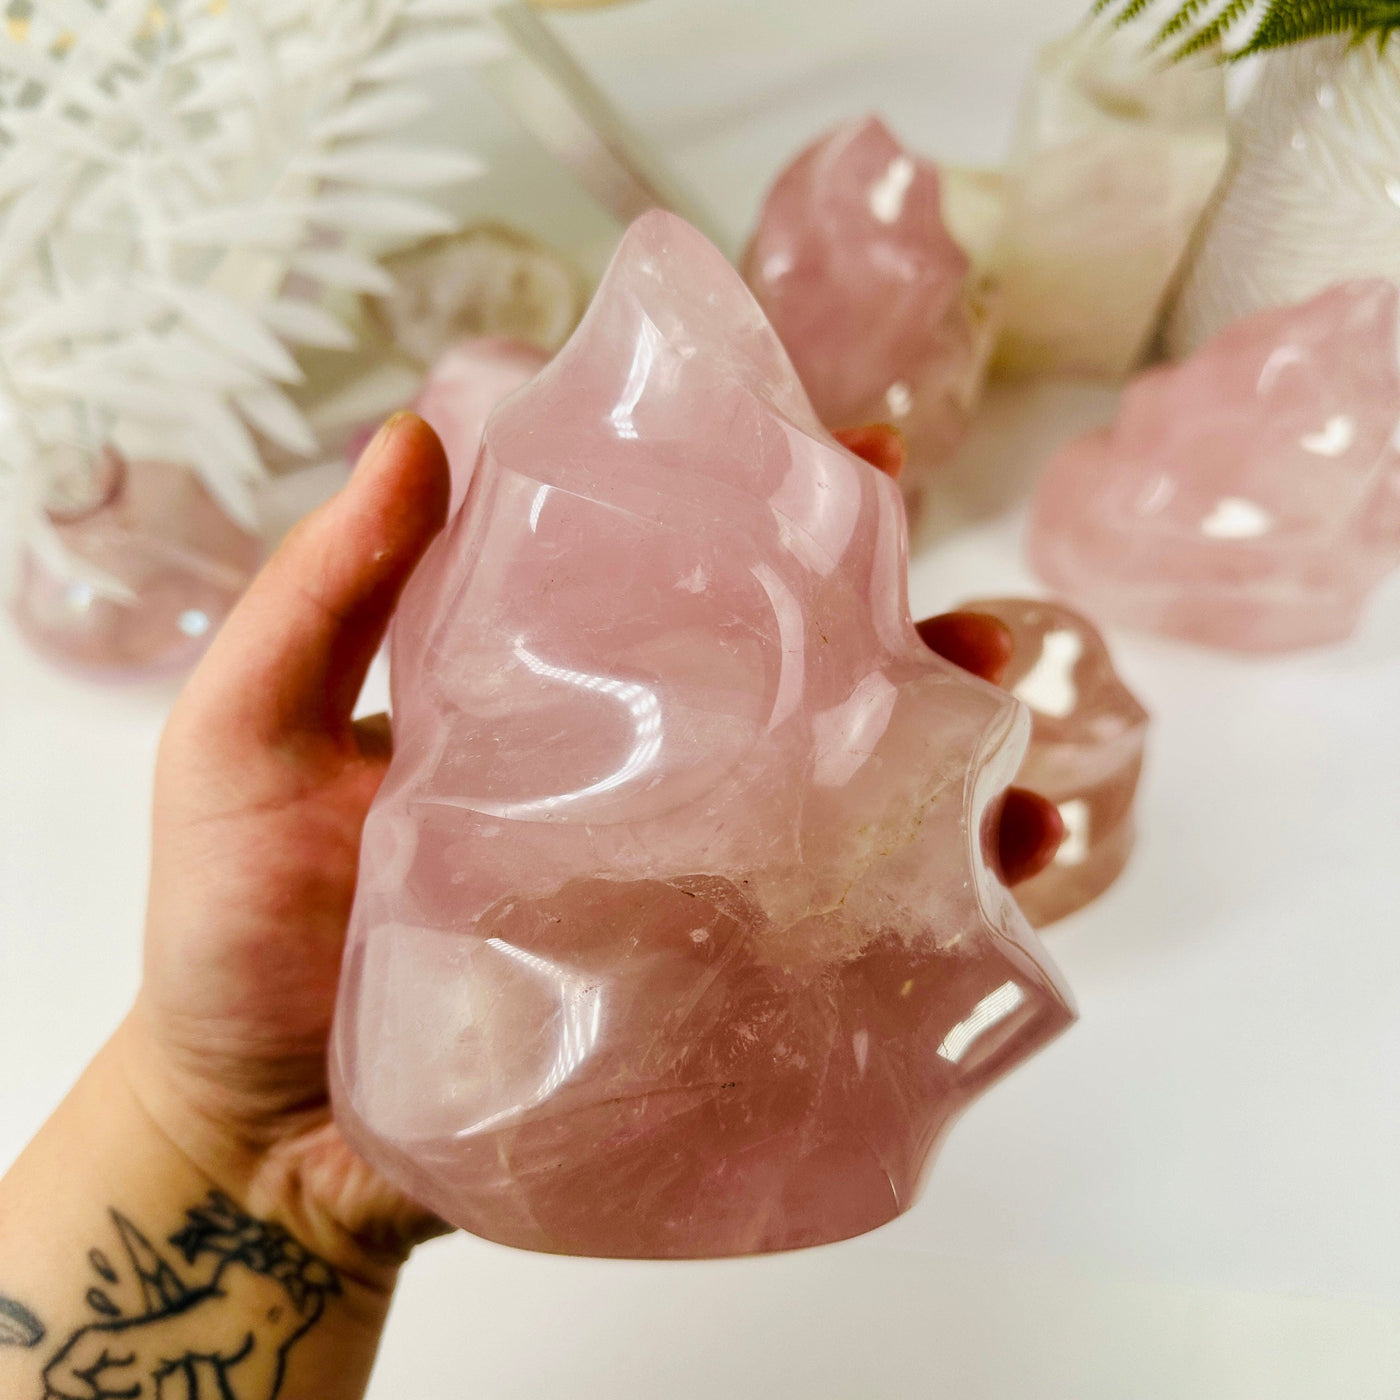 Rose Quartz Flame Tower - Carved Crystal - You Choose variant A in hand for size reference